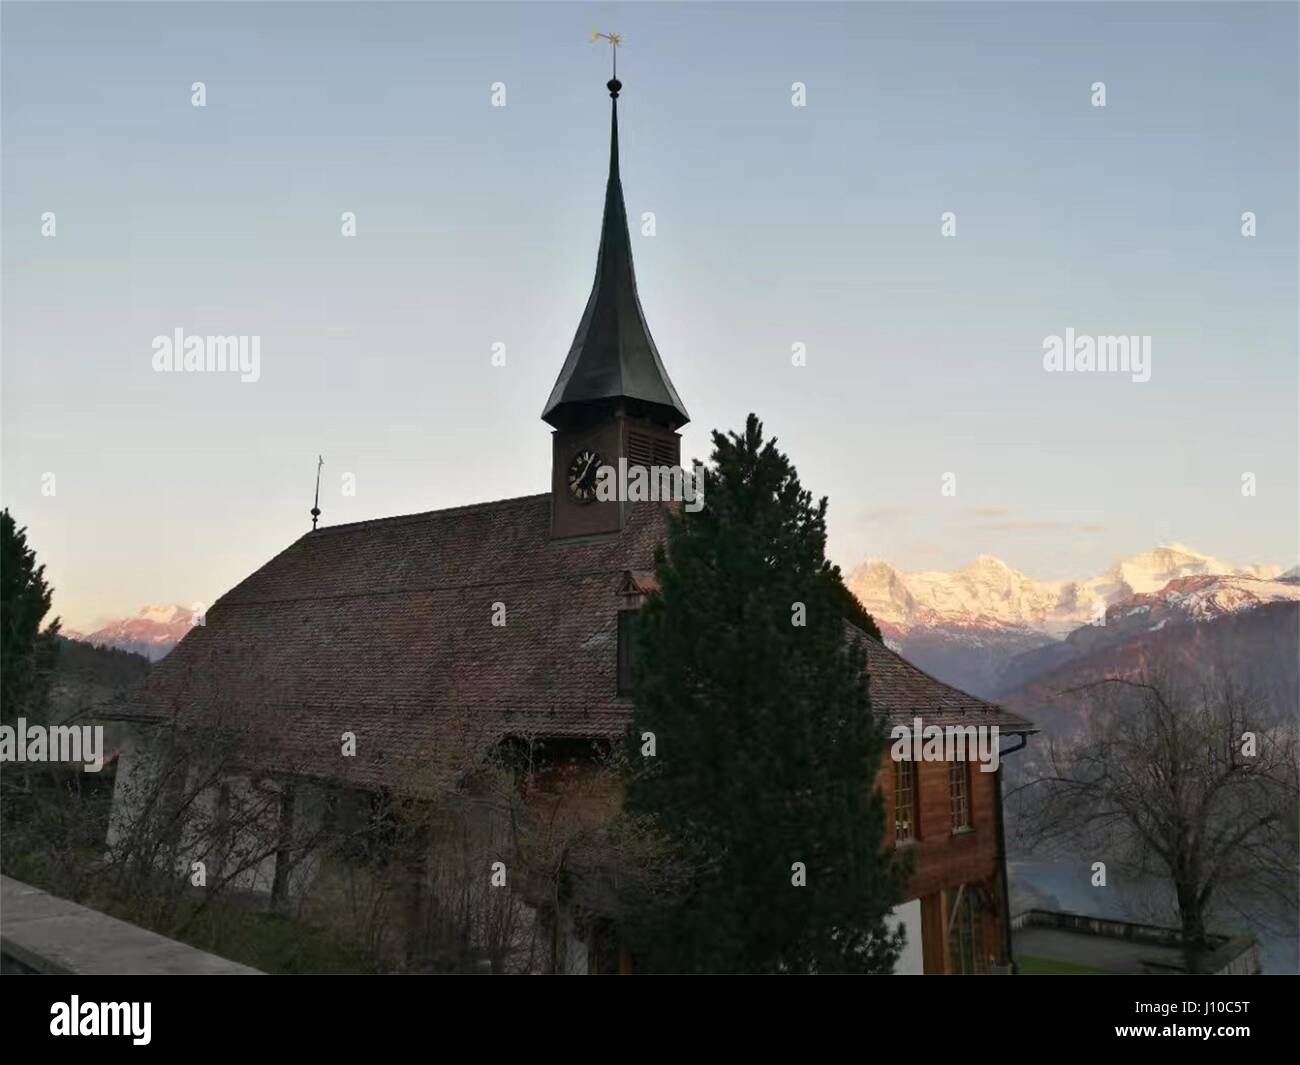 Bern, Bern, China. 14th Apr, 2017. Bern, SWITZERLAND-April 14 2017: (EDITORIAL USE ONLY. CHINA OUT).Interlaken is a town and municipality in the Interlaken-Oberhasli administrative district in the Swiss canton of Bern. It is an important and well-known tourist destination in the Bernese Highlands region of the Swiss Alps, and the main transport gateway to the mountains and lakes of that region. Credit: SIPA Asia/ZUMA Wire/Alamy Live News Stock Photo